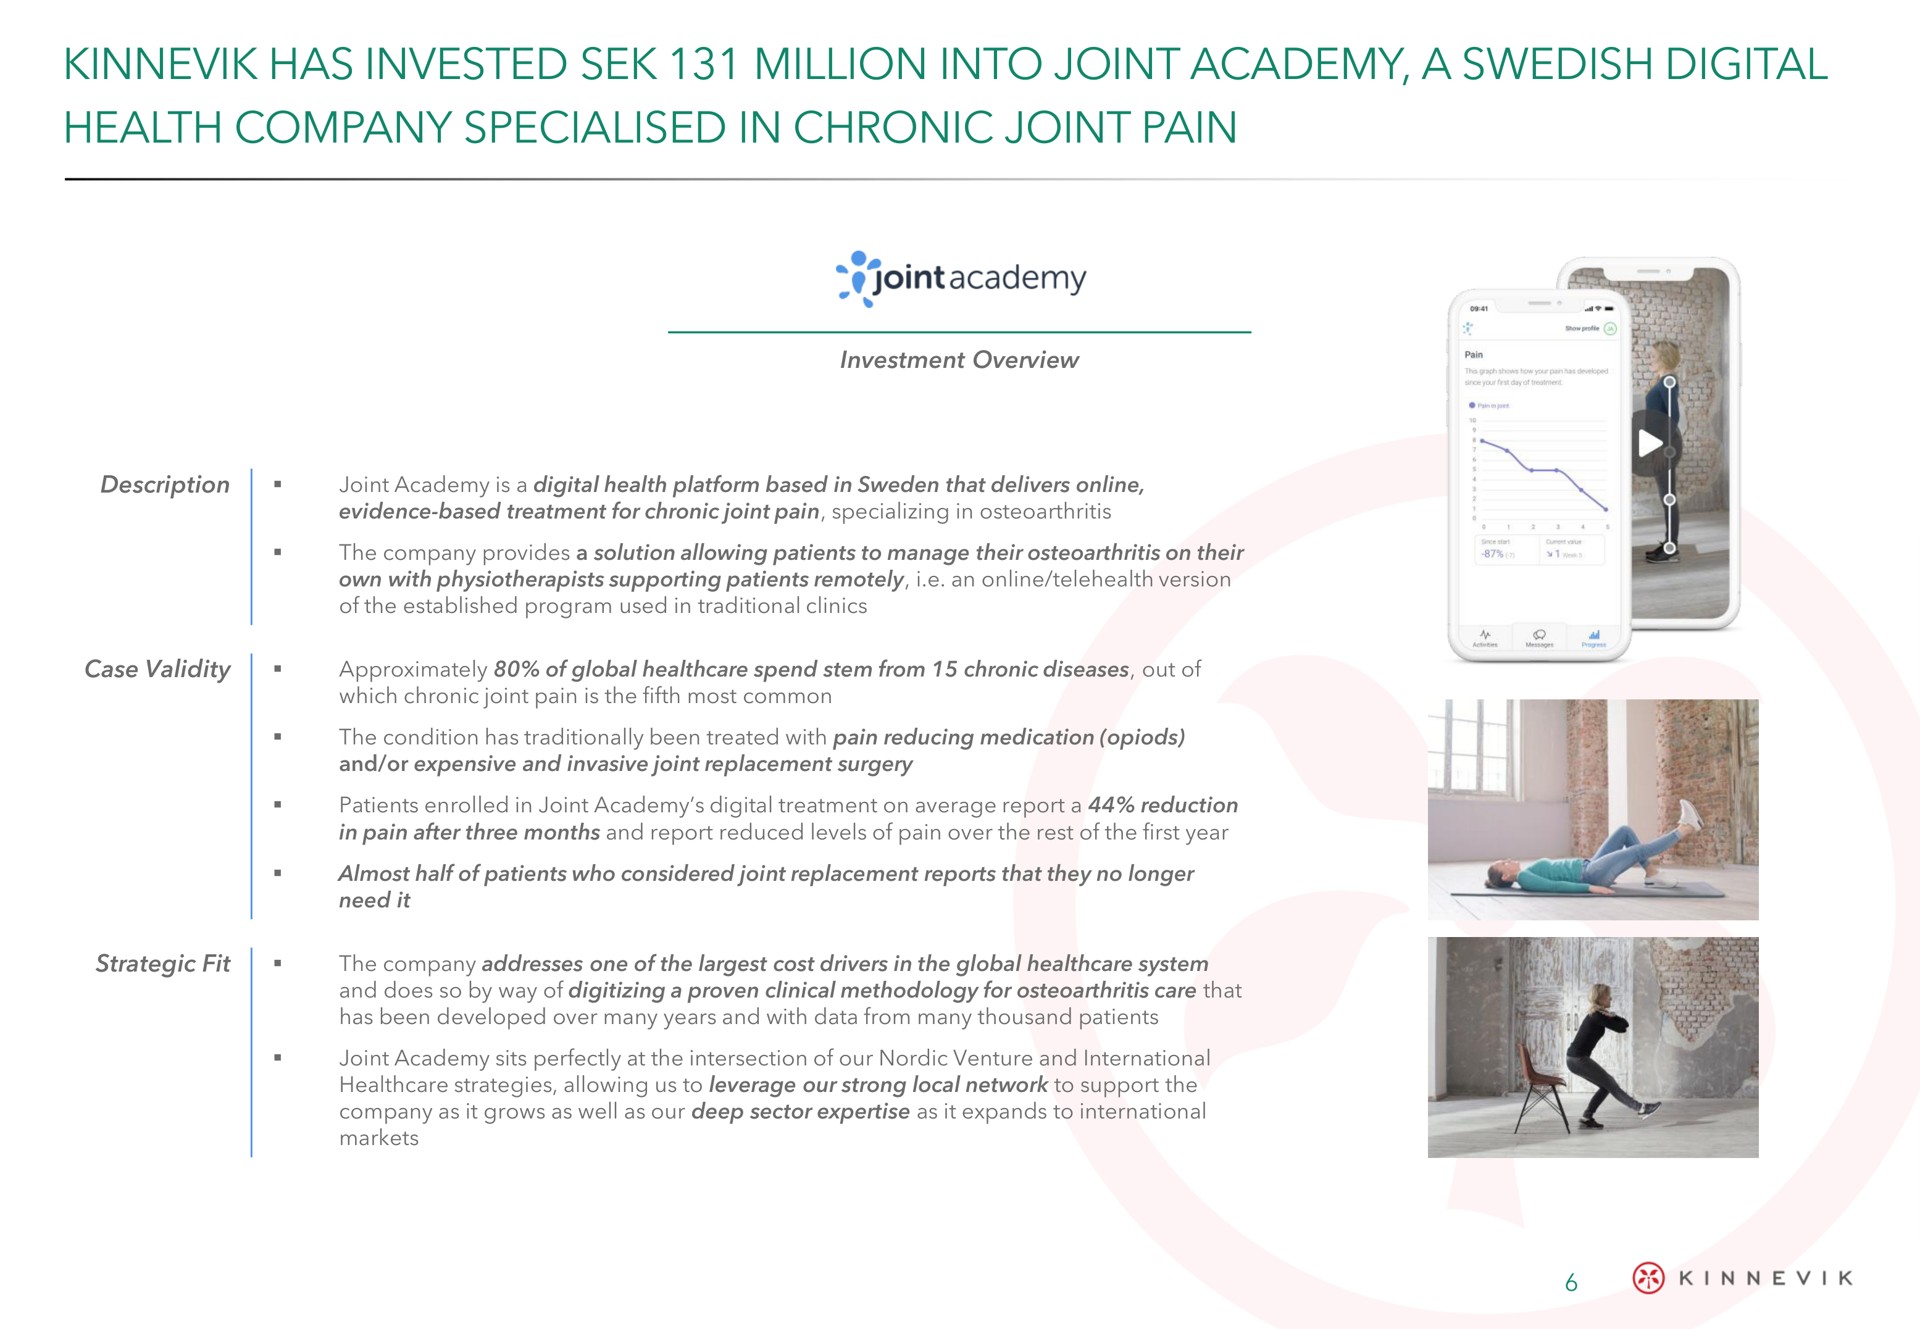 has invested million into joint academy a digital health company in chronic joint pain | Kinnevik